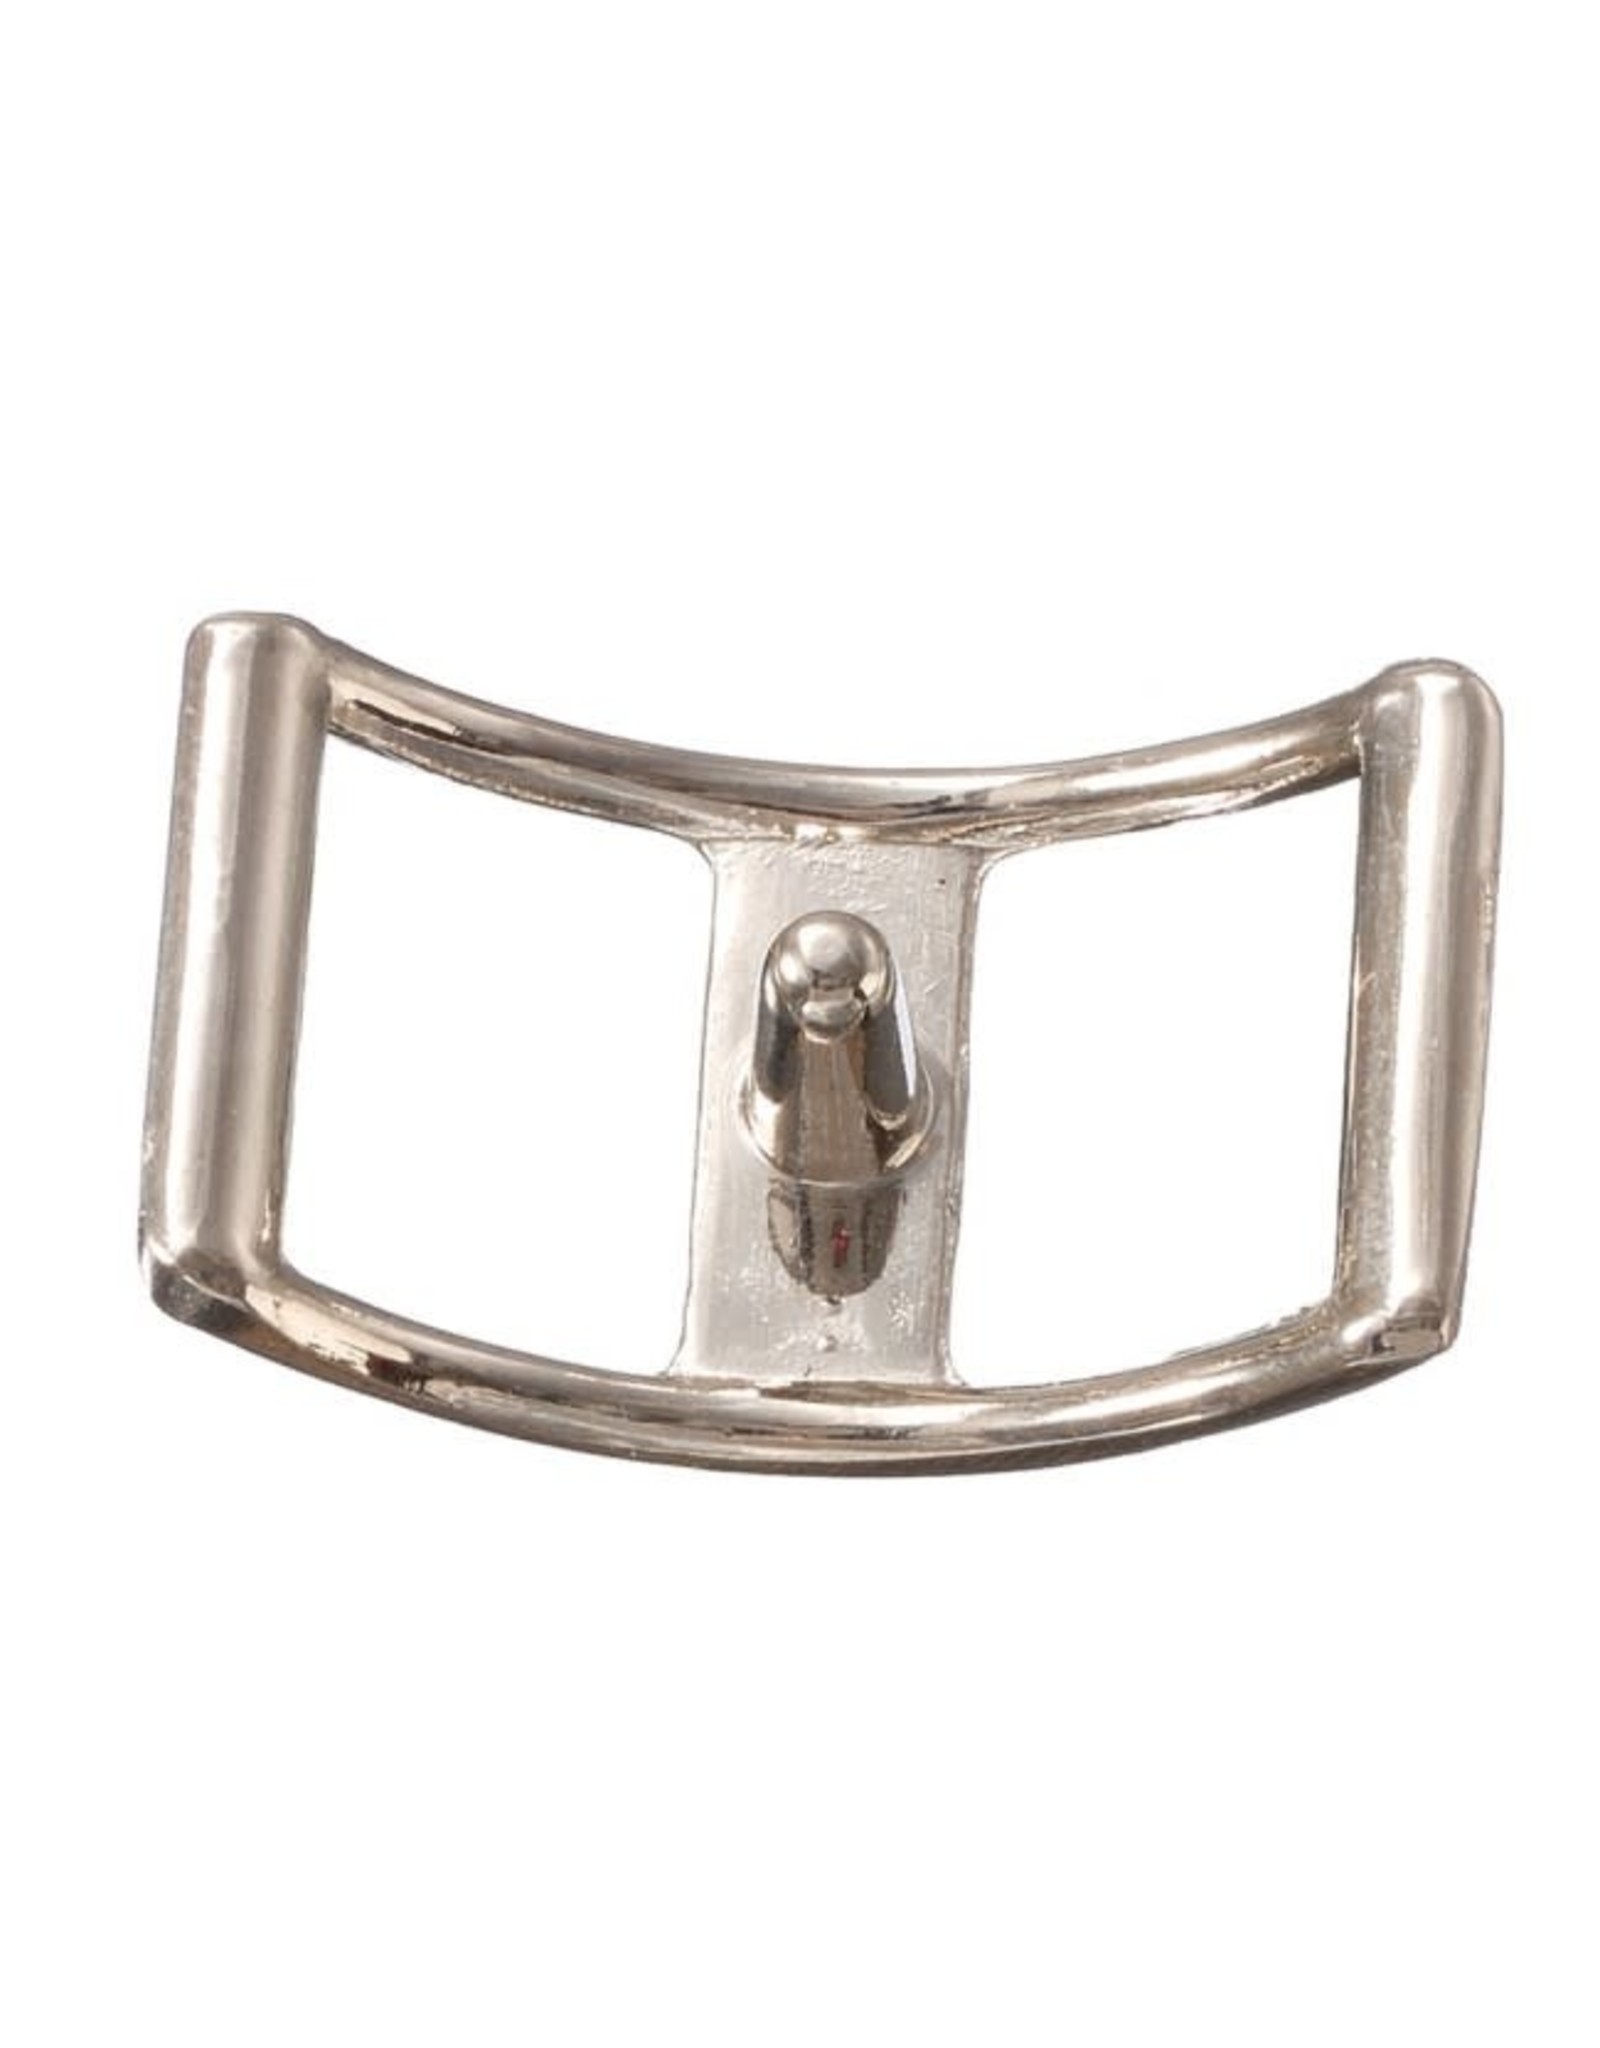 Conway Buckle Nickel Plated 5/8"